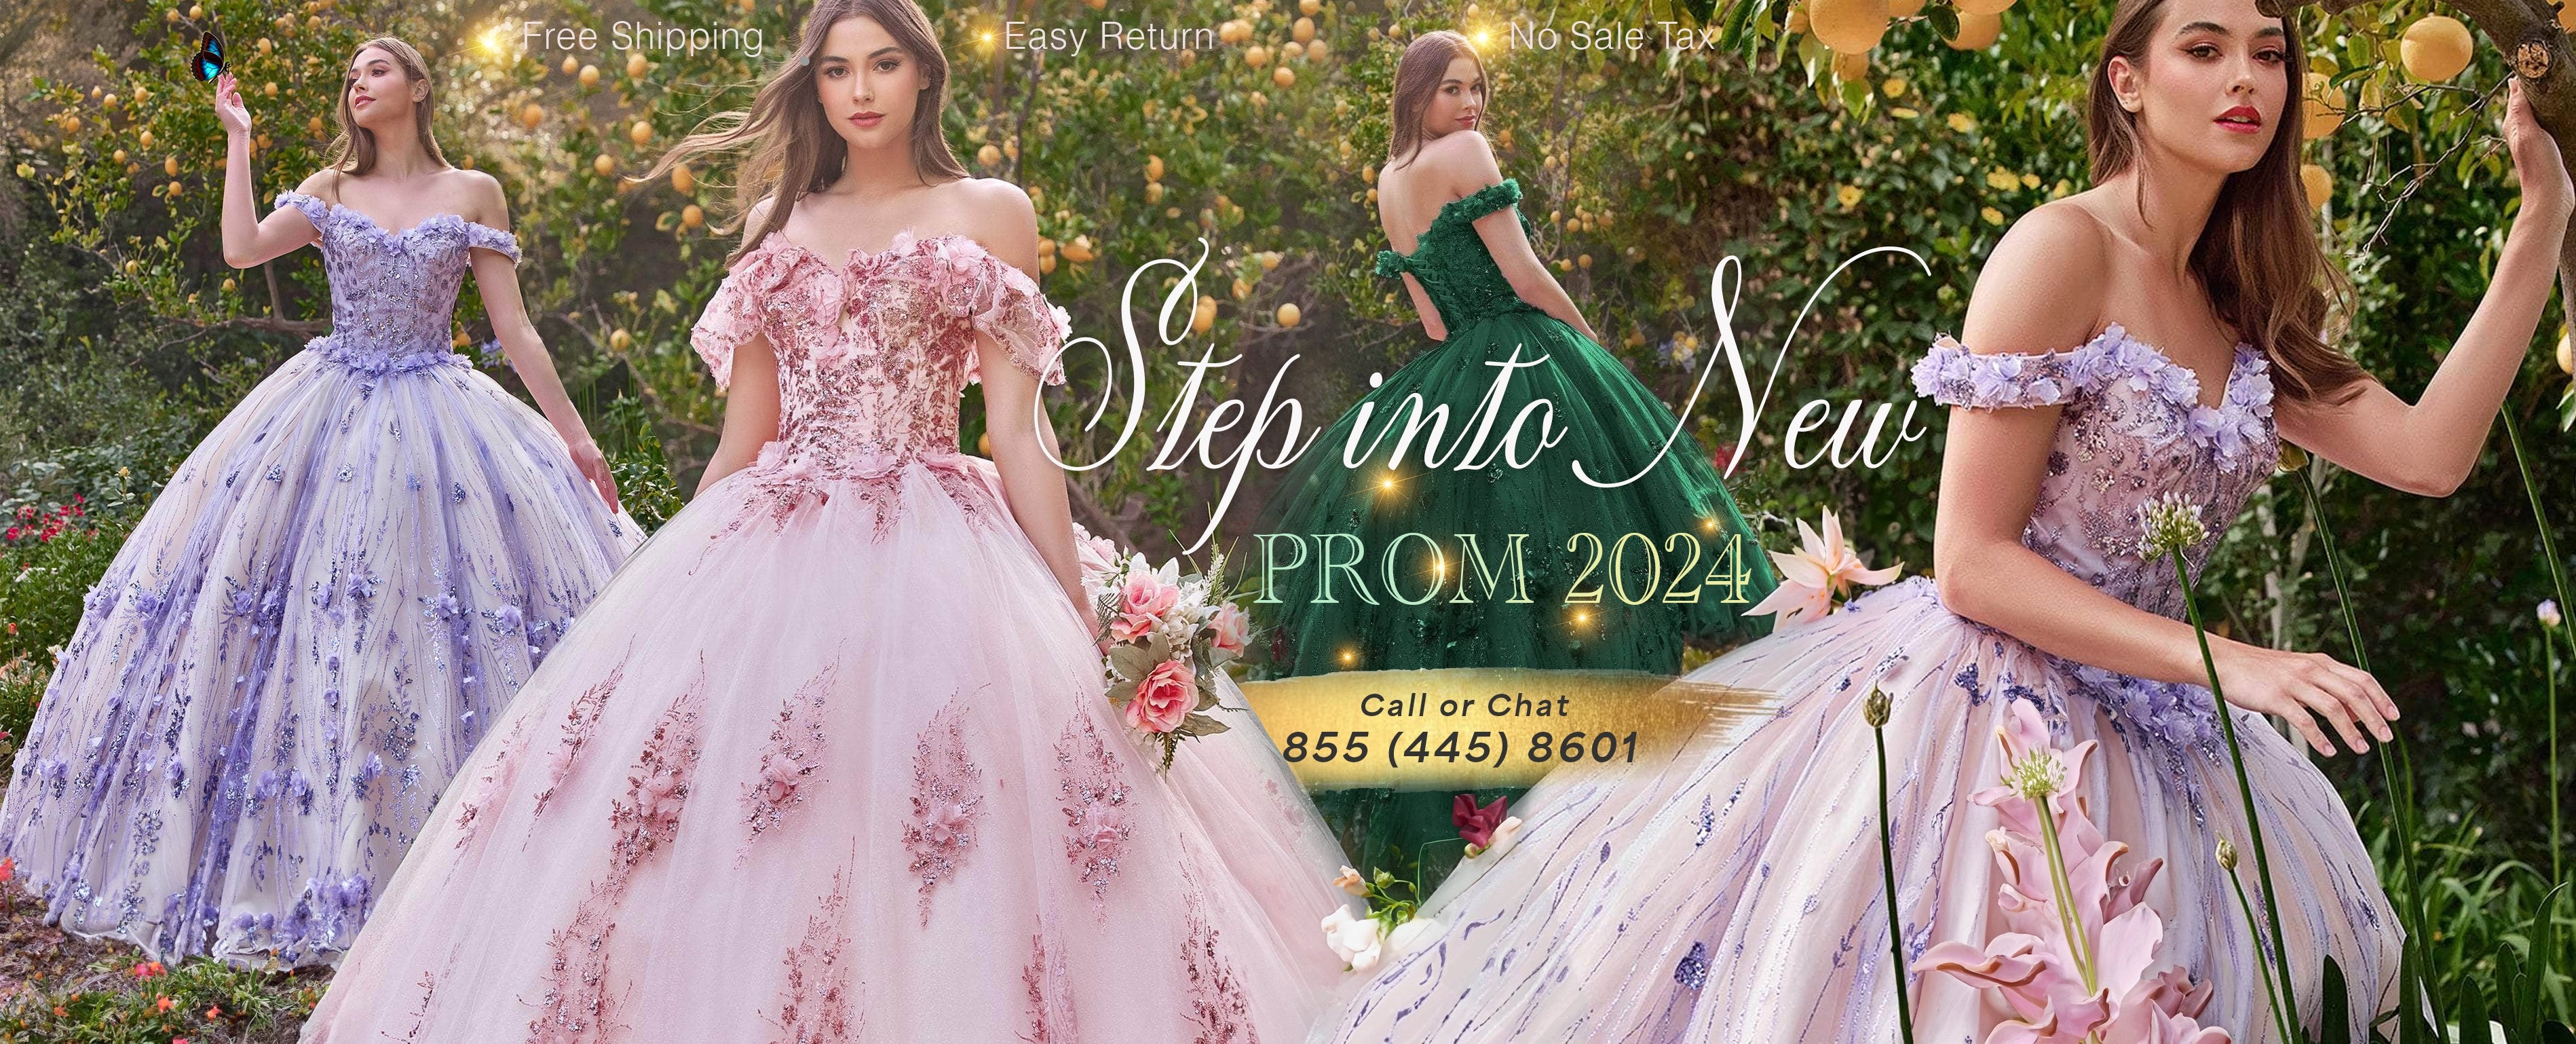 Couture Candy Desktop Banner Step into New Prom 2024